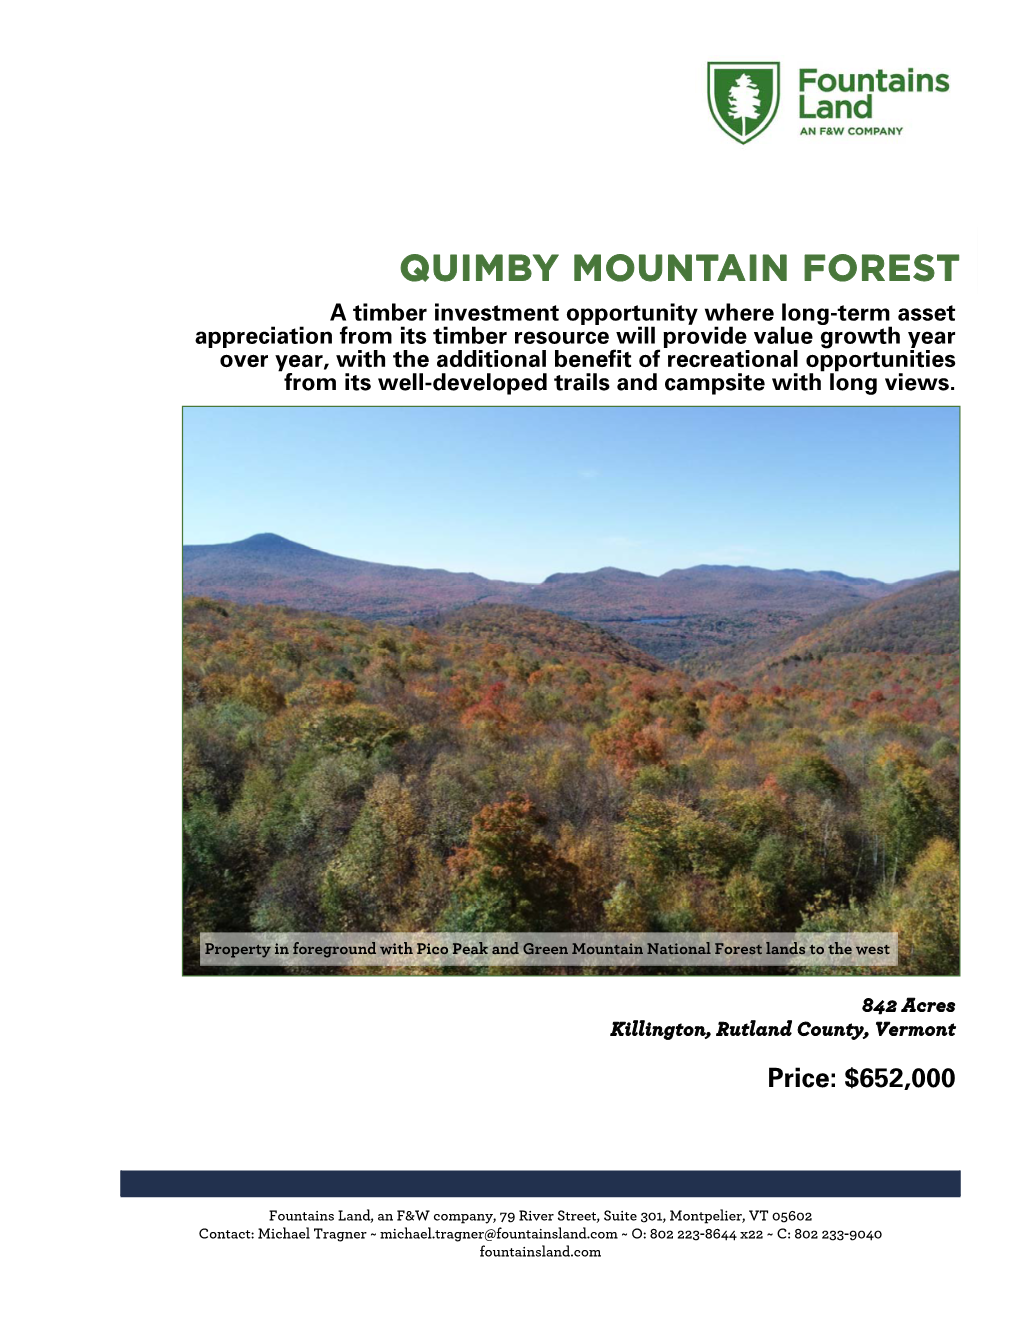 Quimby Mountain Forest